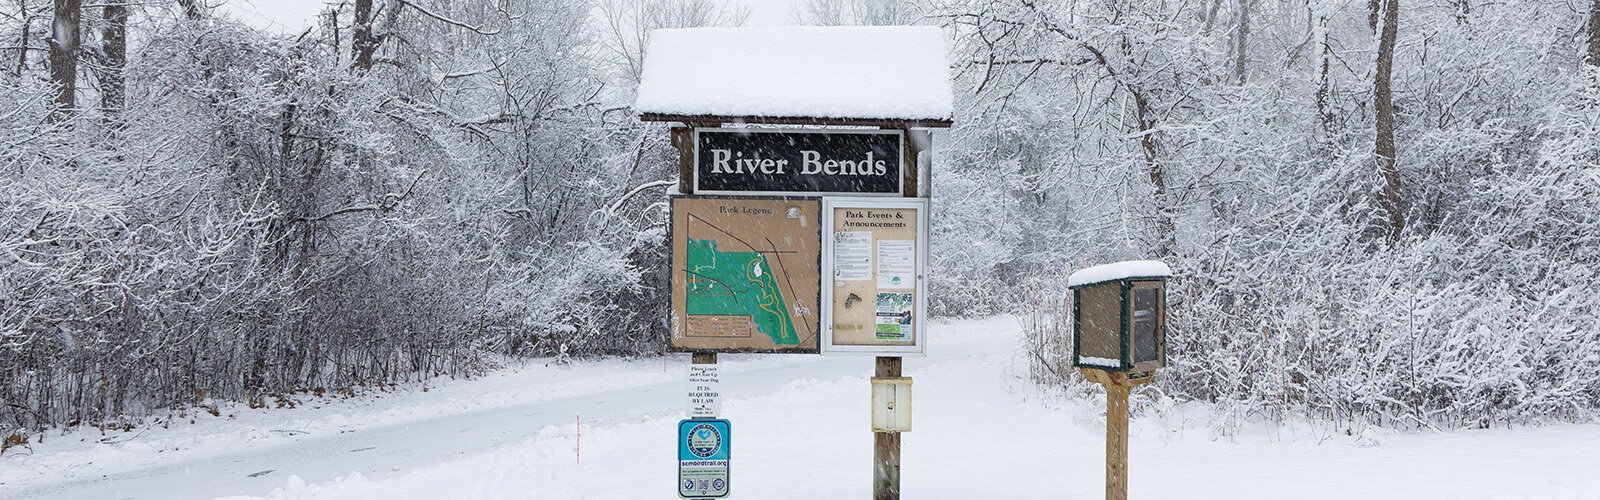 A snowy day at River Bends Park in Shelby Township.